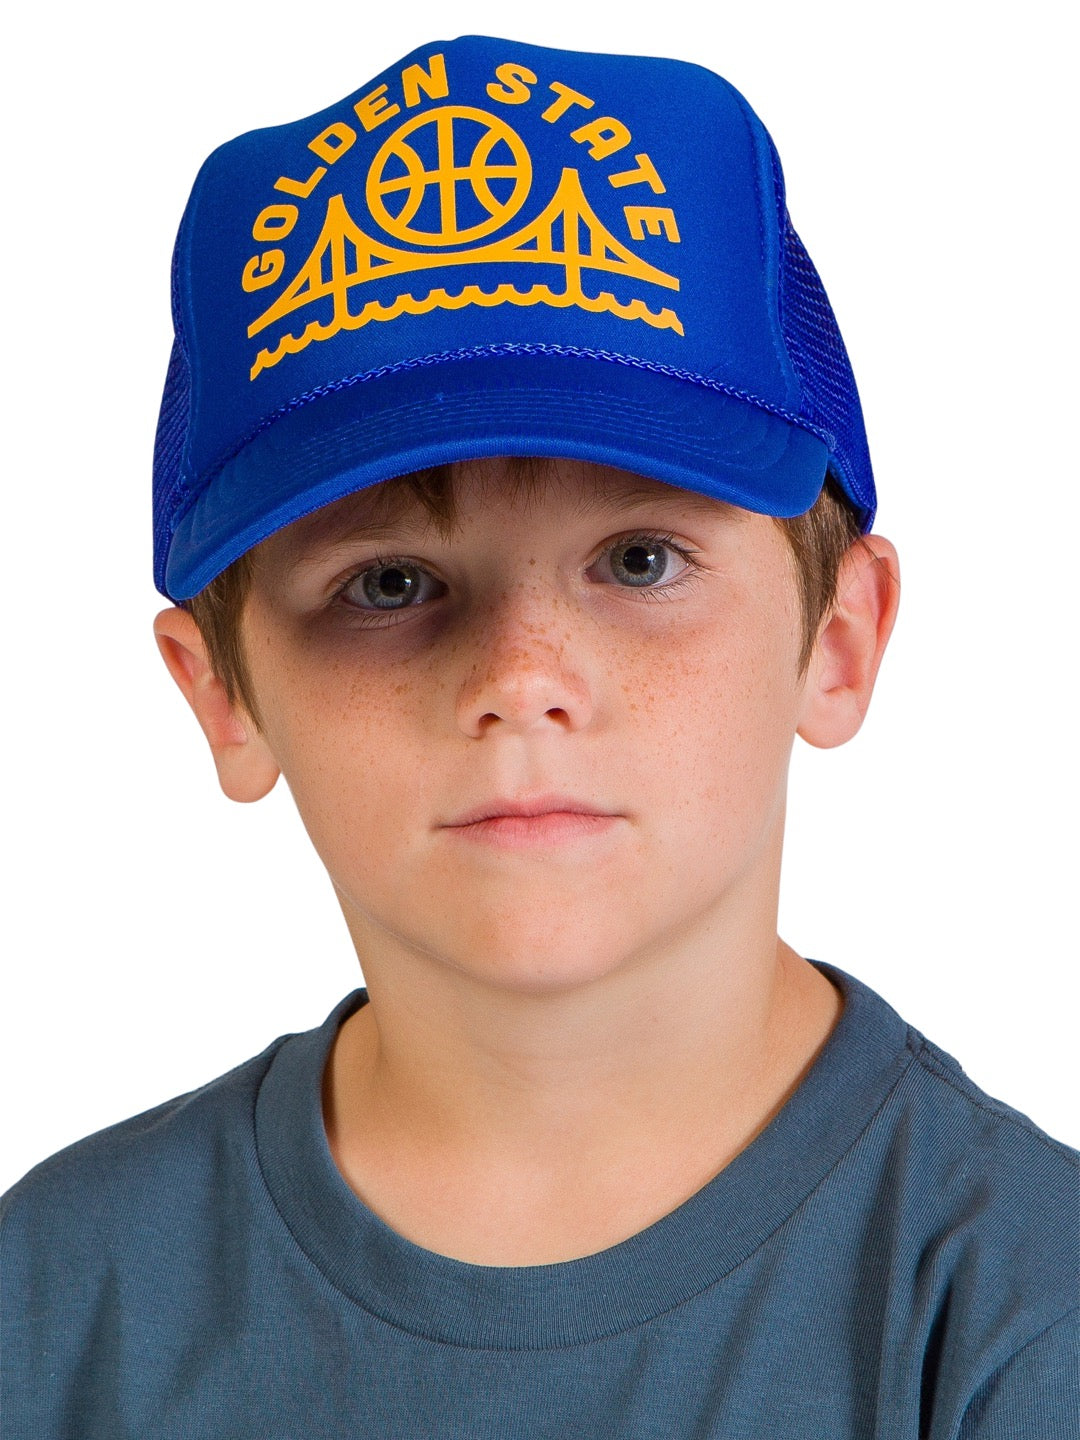 warriors youth hat